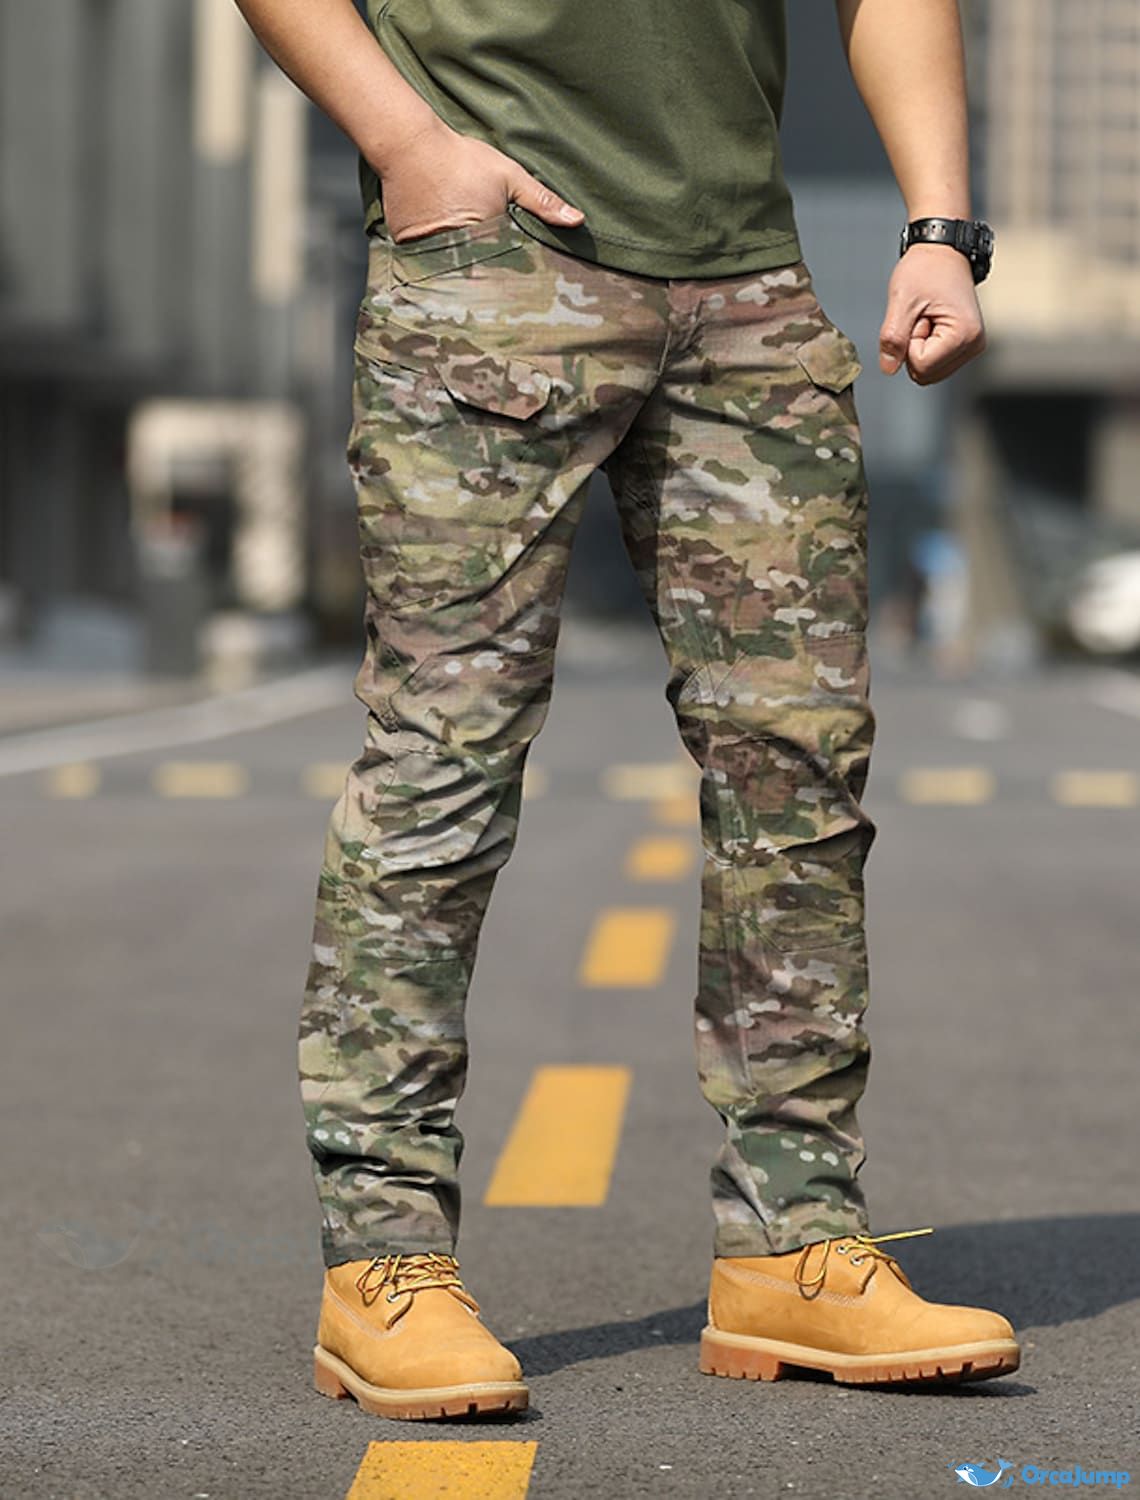 OrcaJump - Mens Camouflage Tactical Cargo Pants for Outdoor Sports, Fi